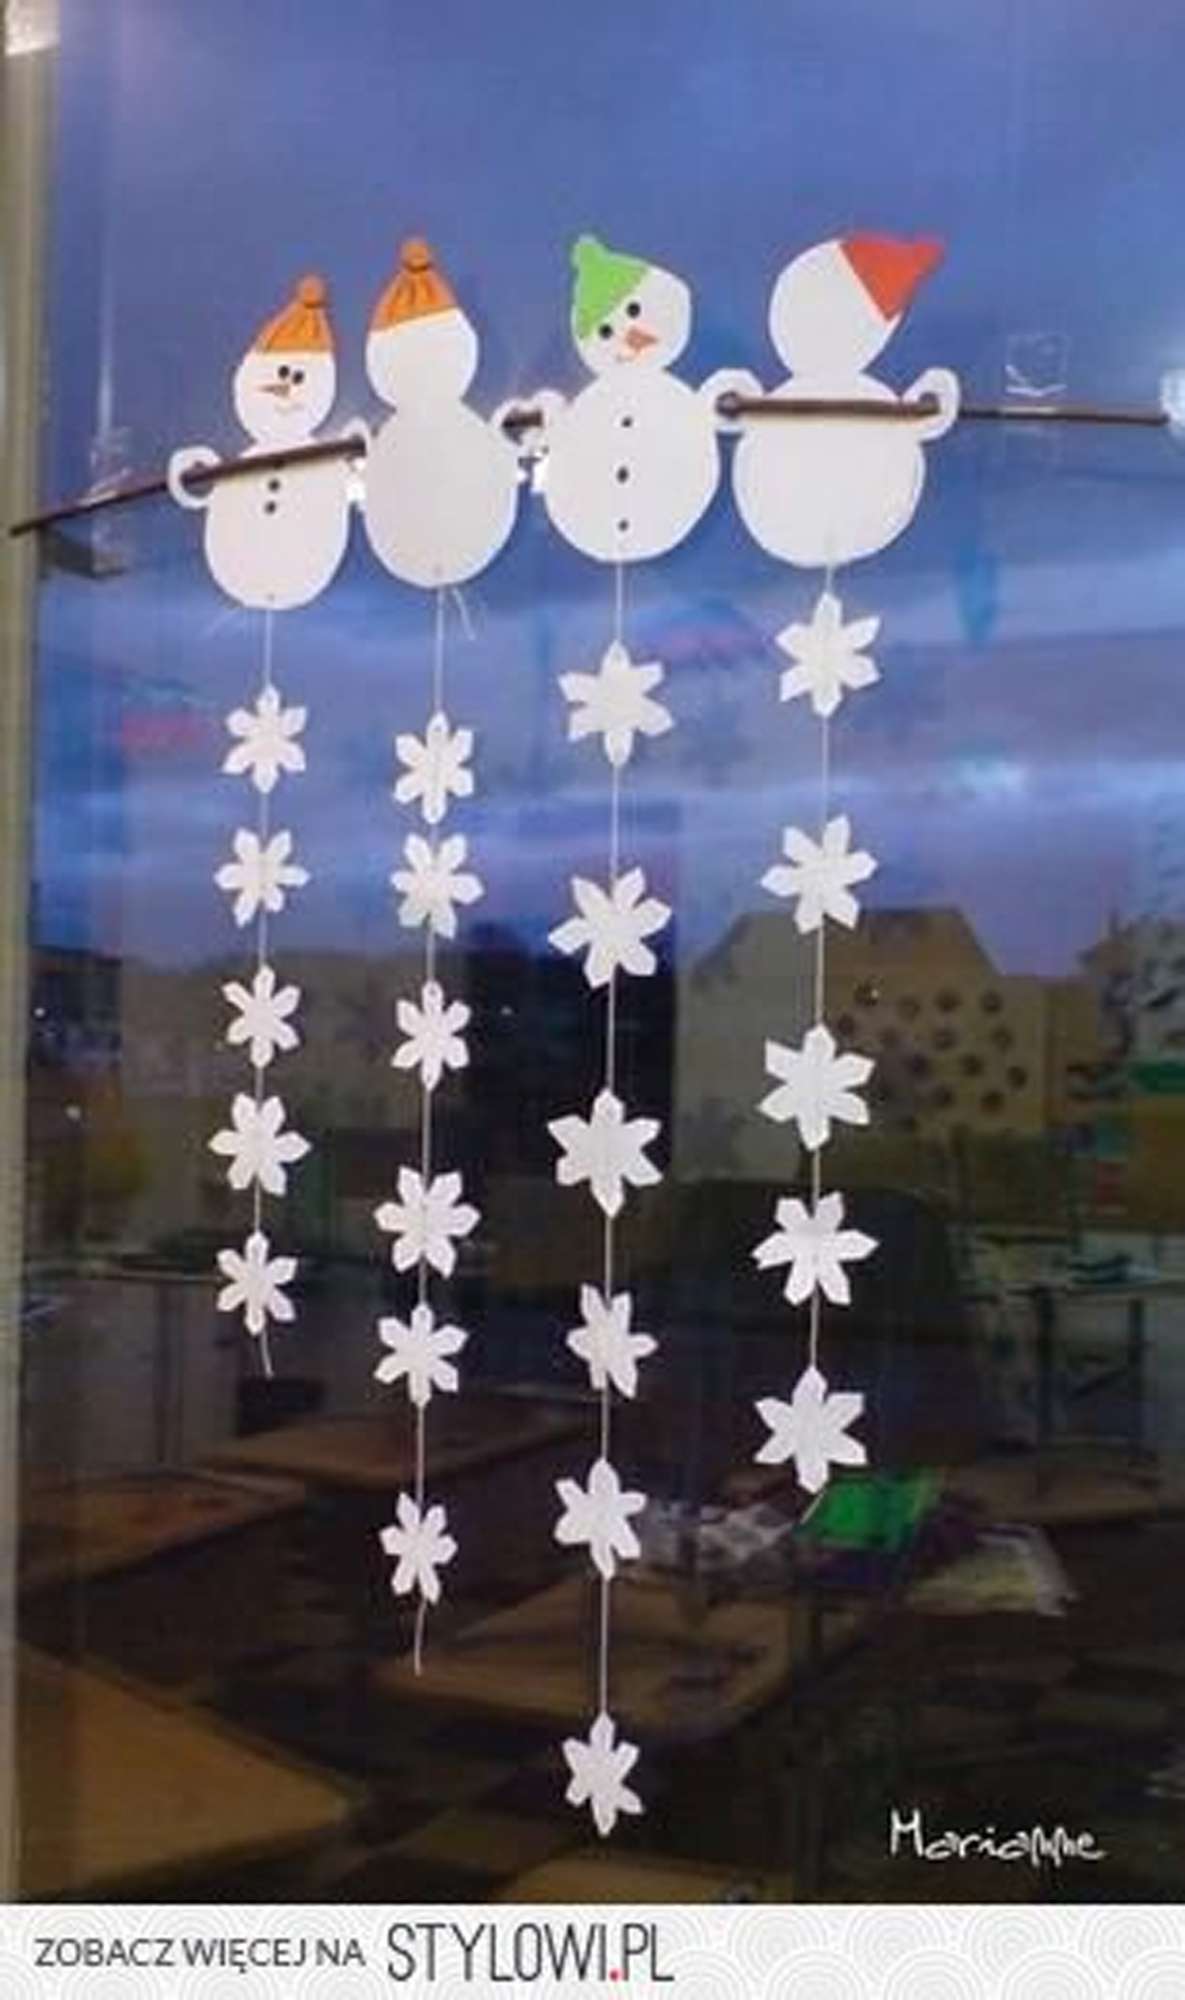 paper snowmen with a string of paper snowflakes